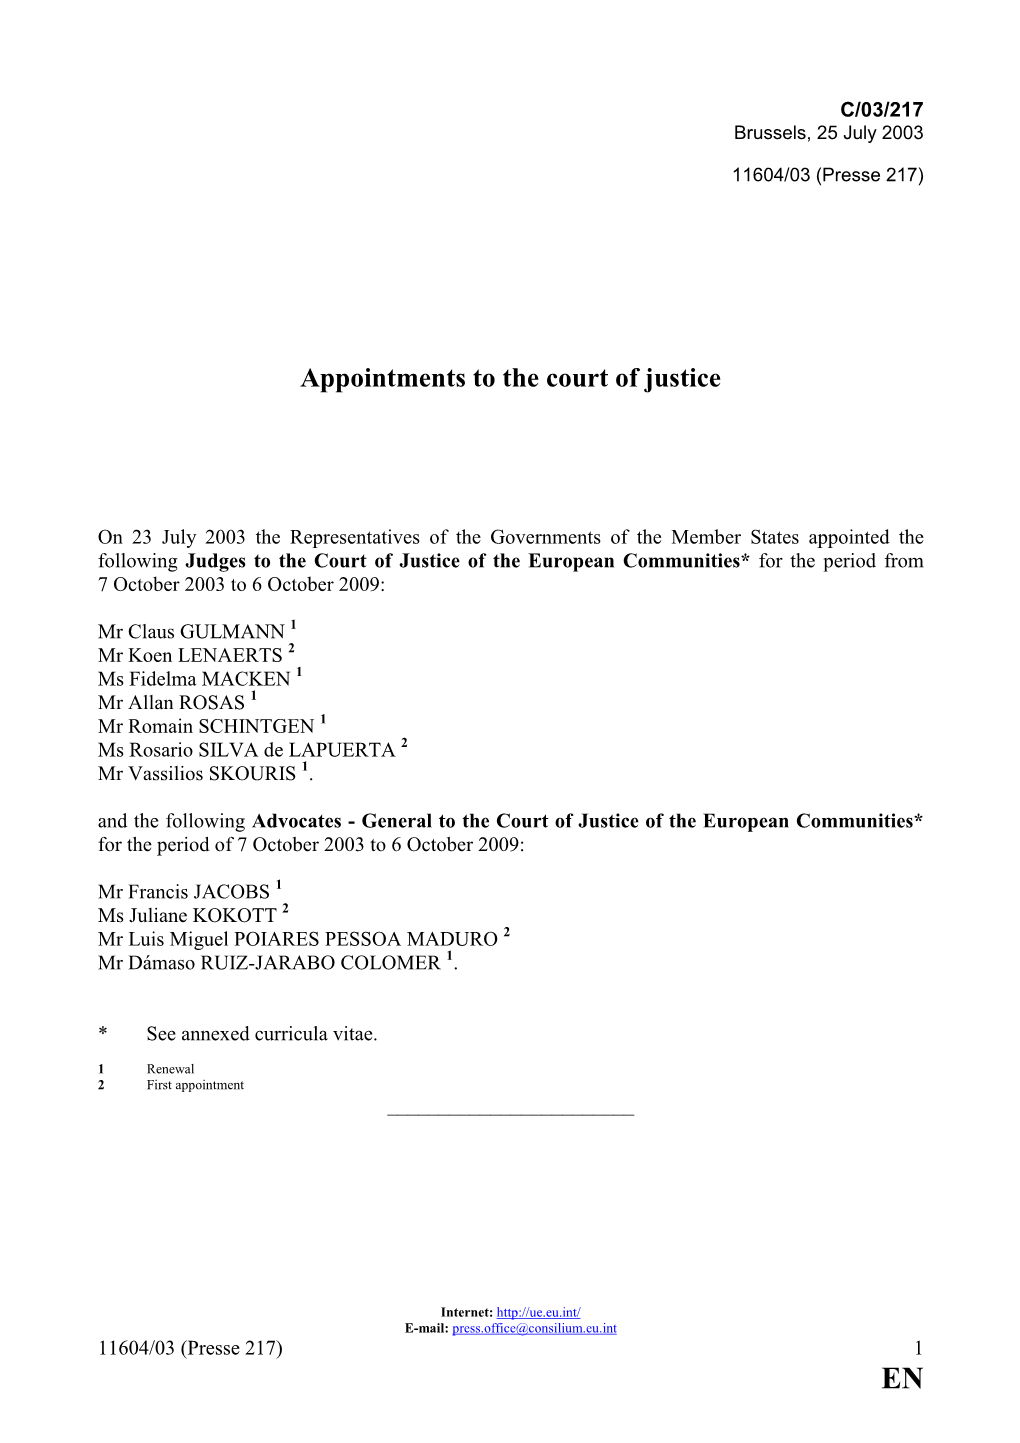 Appointments to the Court of Justice